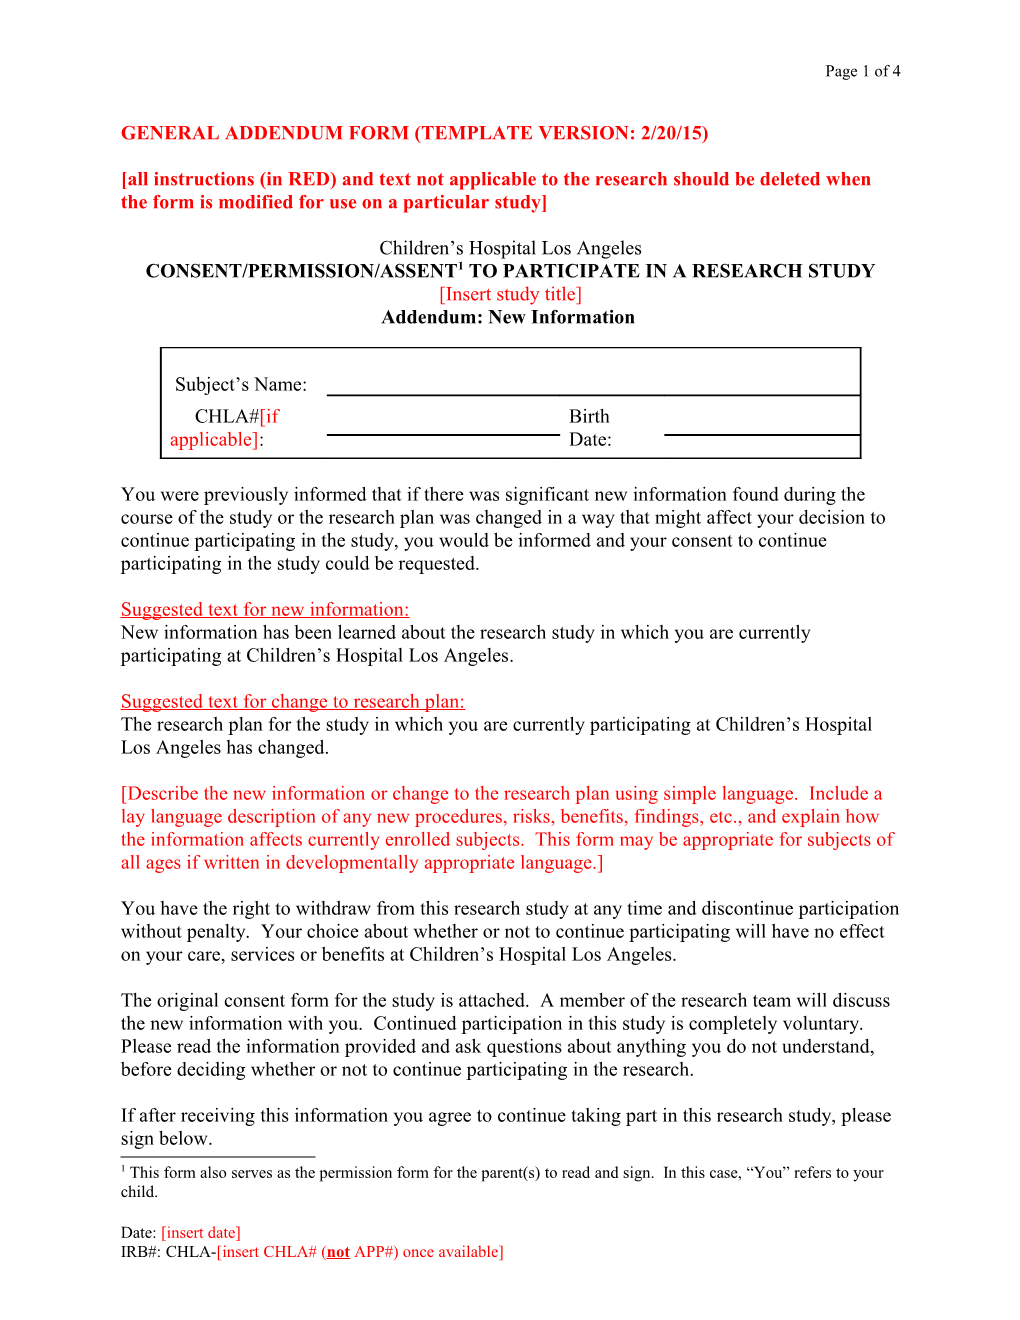 Sample Consent Form s2